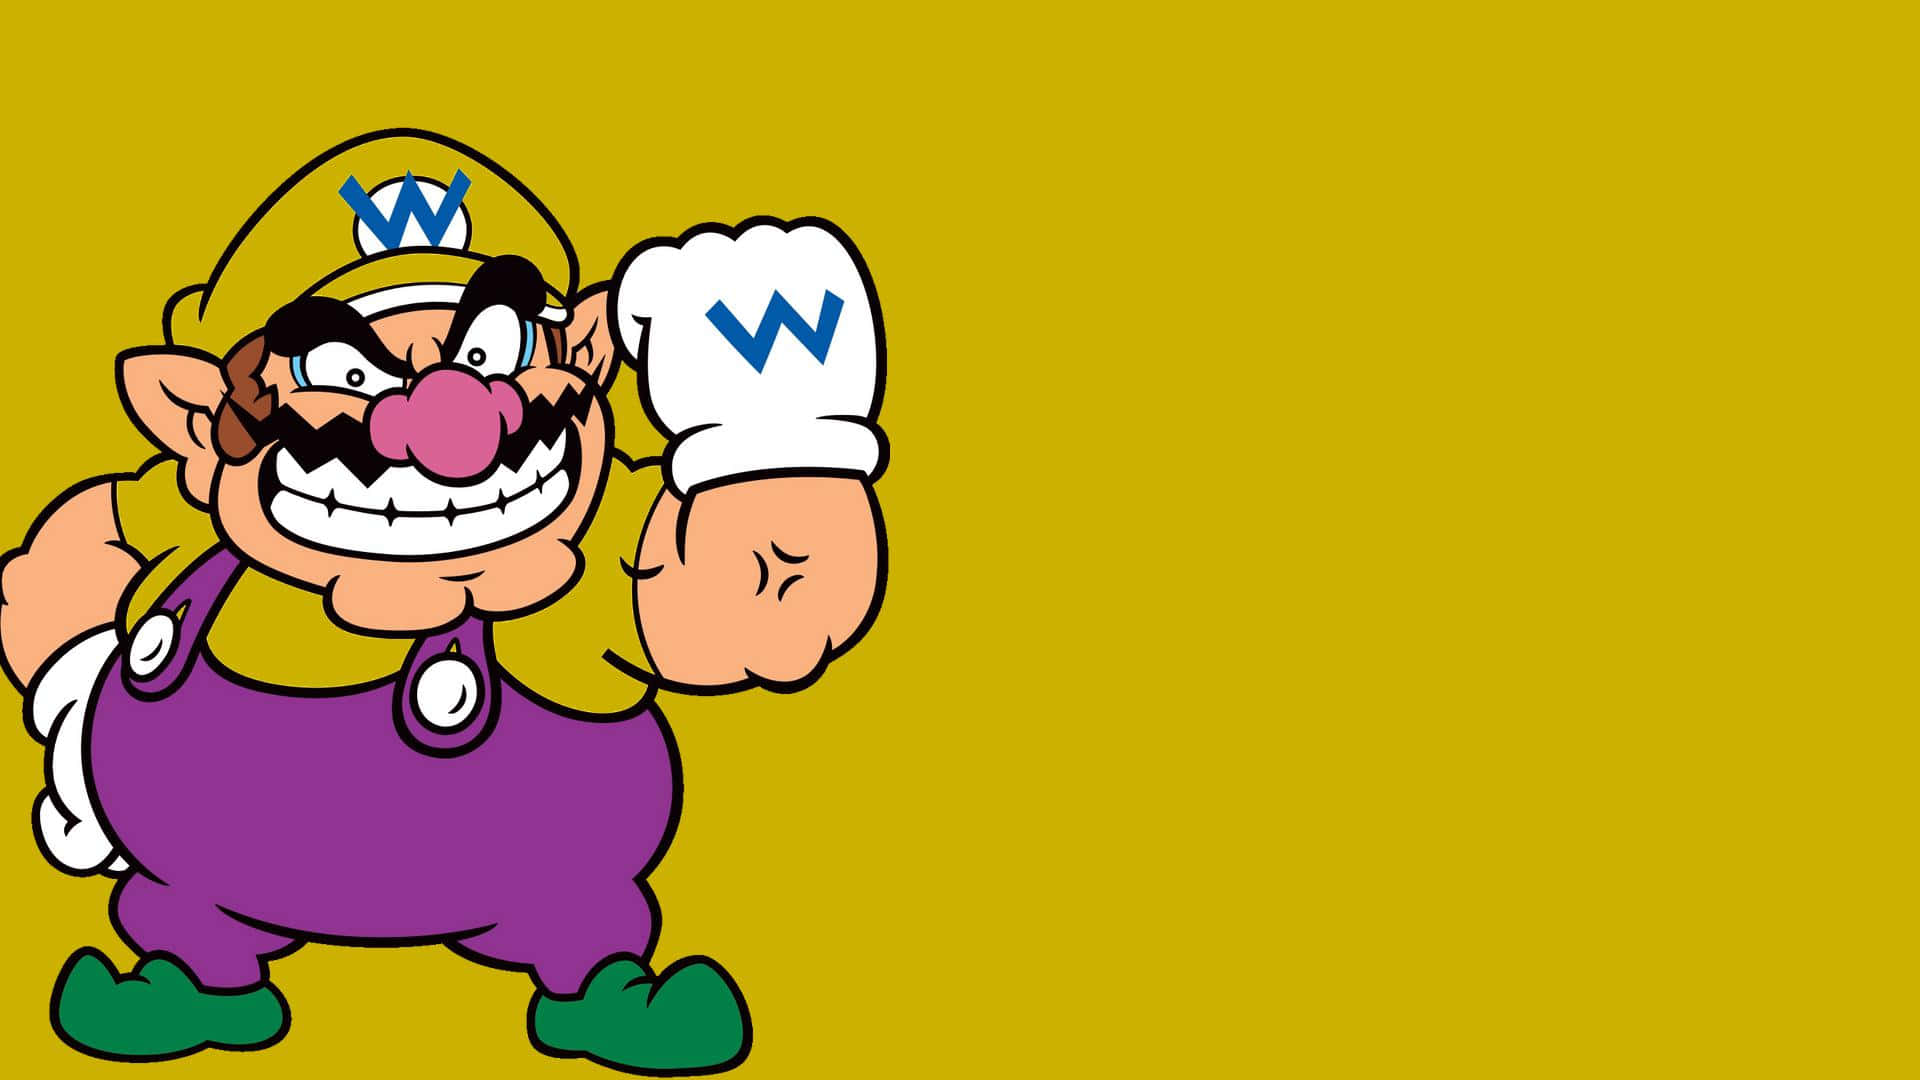 Wario With An Evil Grin In The Night Sky Background